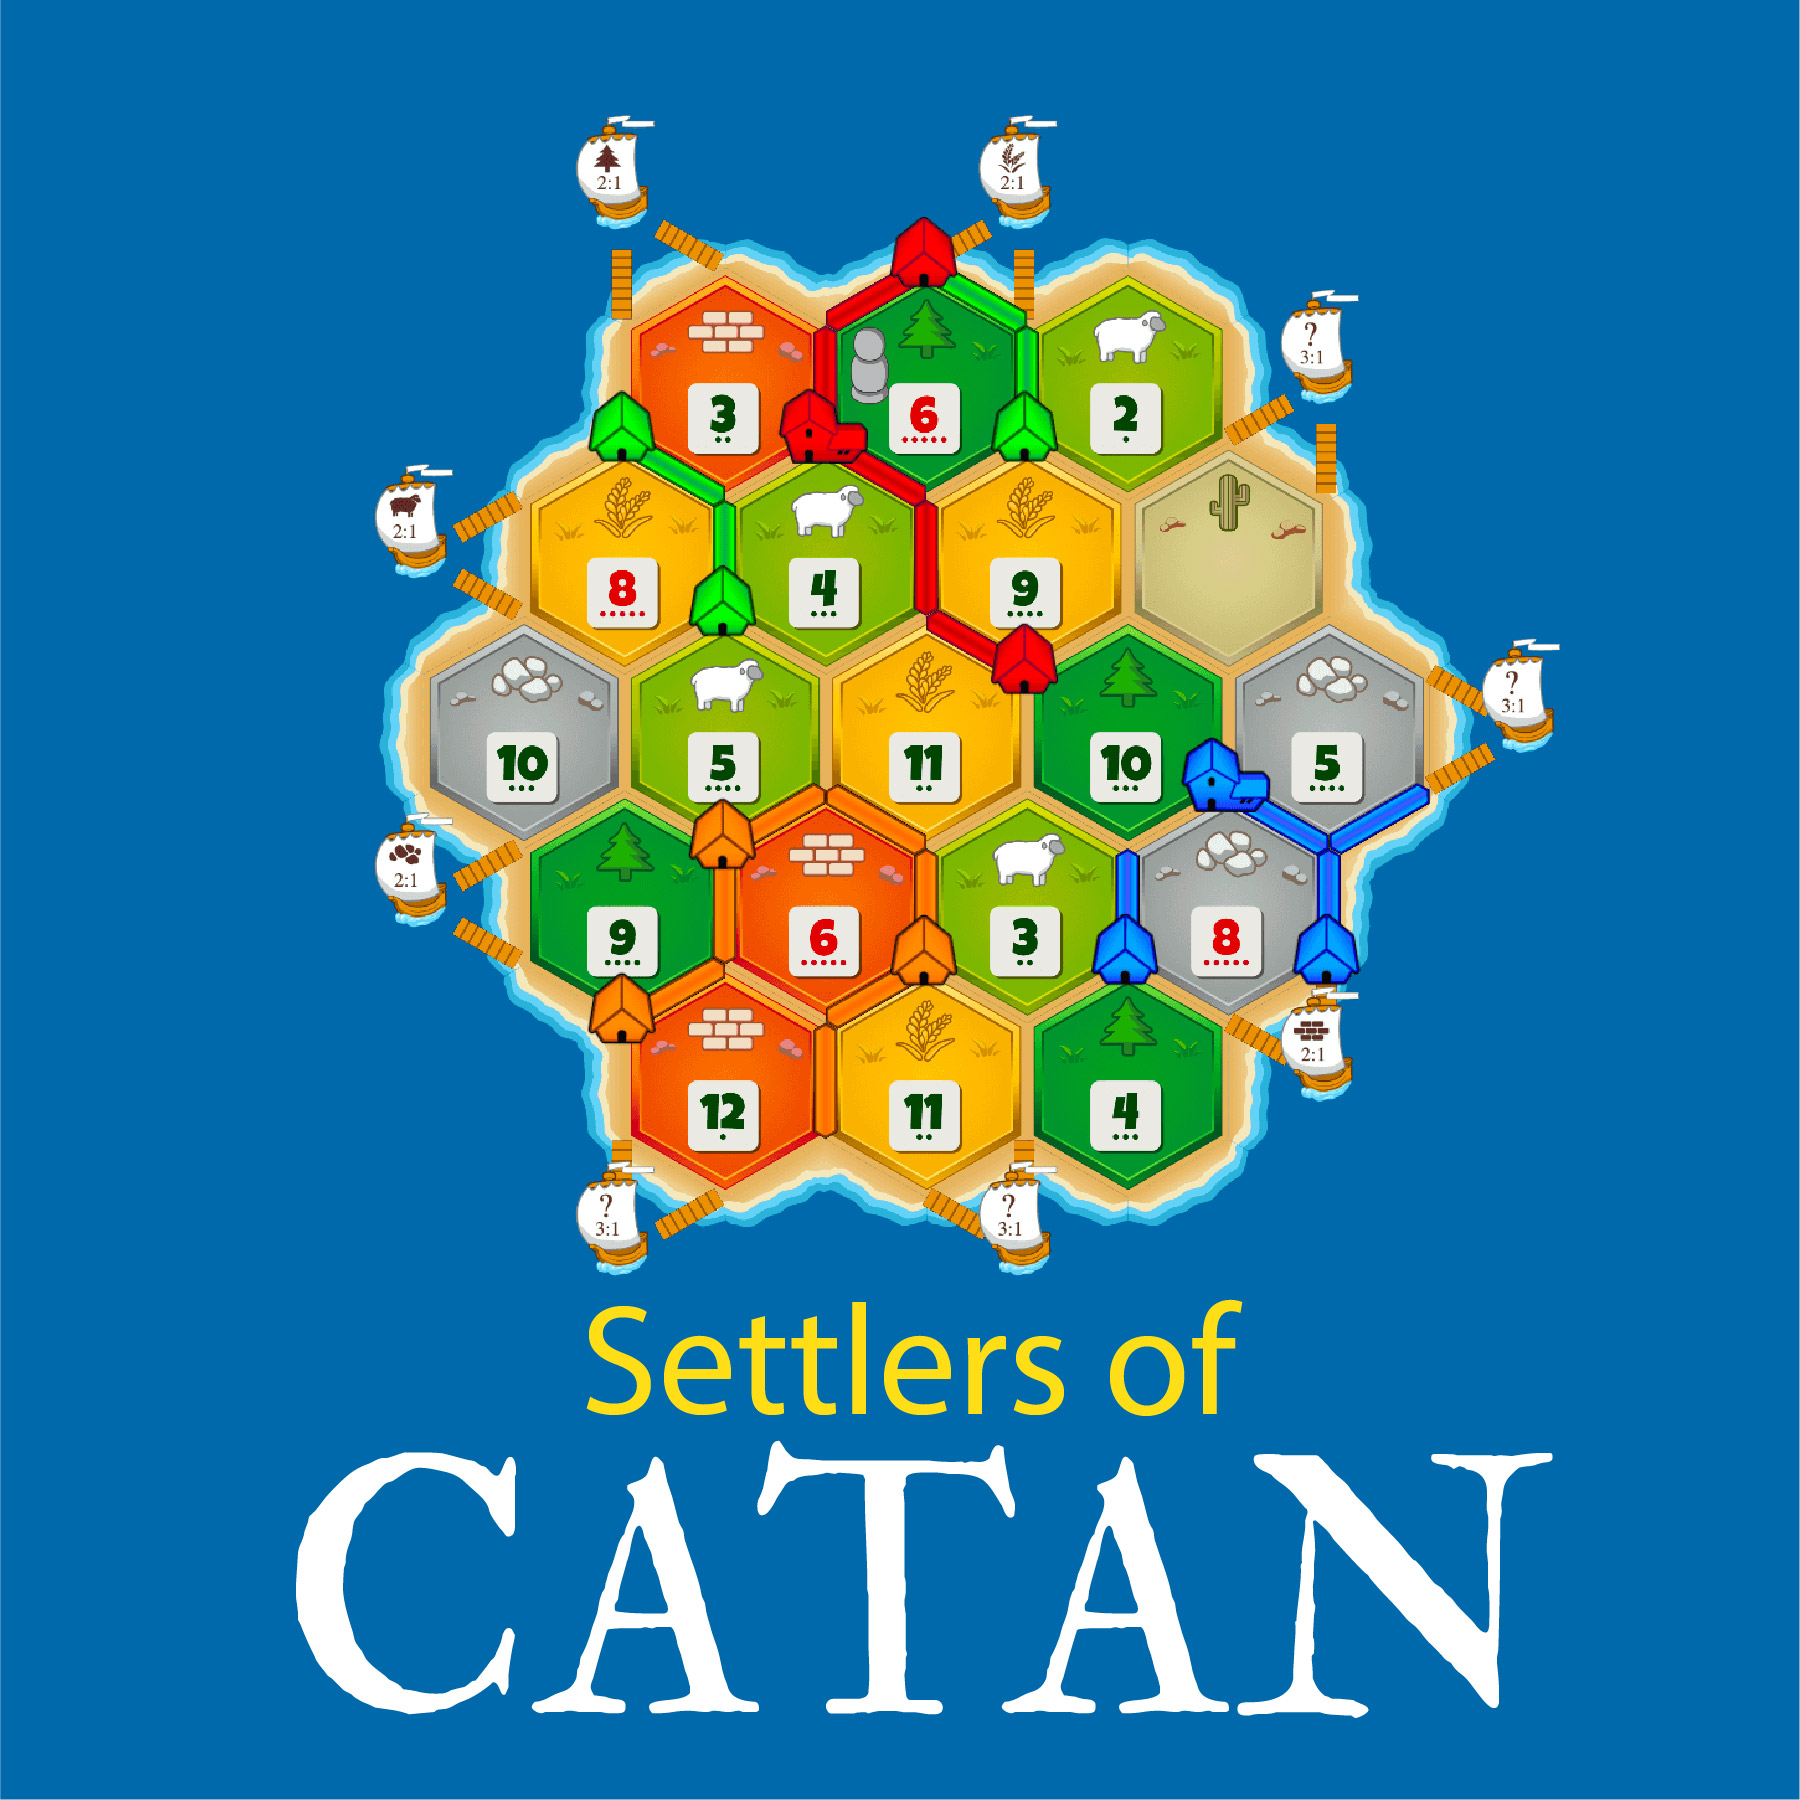 Game board with "Settlers of Catan" written under